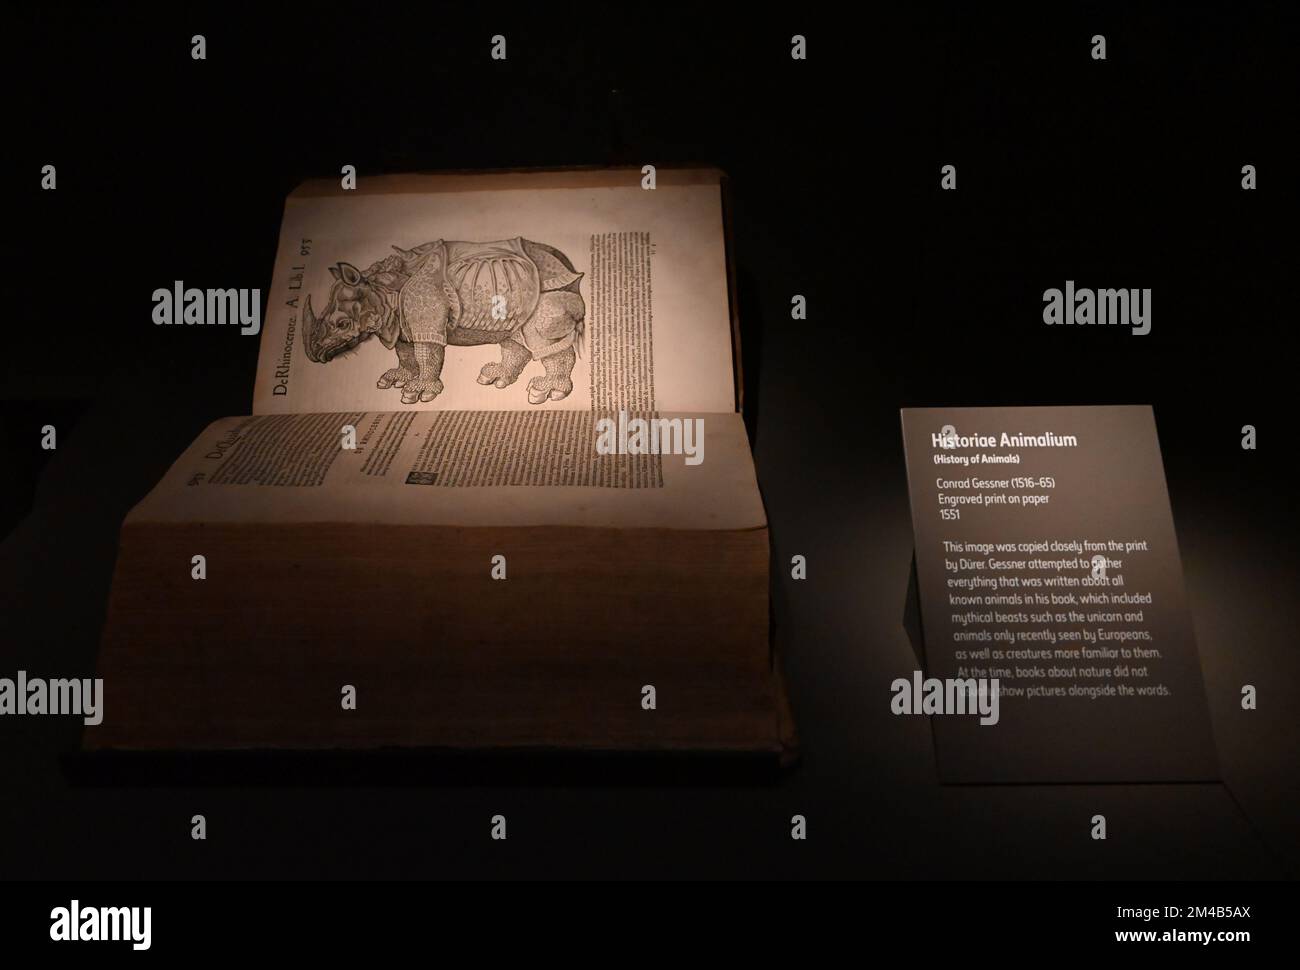 The Substitute, a video installation by artist Alexandra Daisy Ginsberg  that brings visitors face-to-face with a digitally recreated, life-sized  northern white rhino. With the subspecies nearly extinct, this piece  explores the paradox